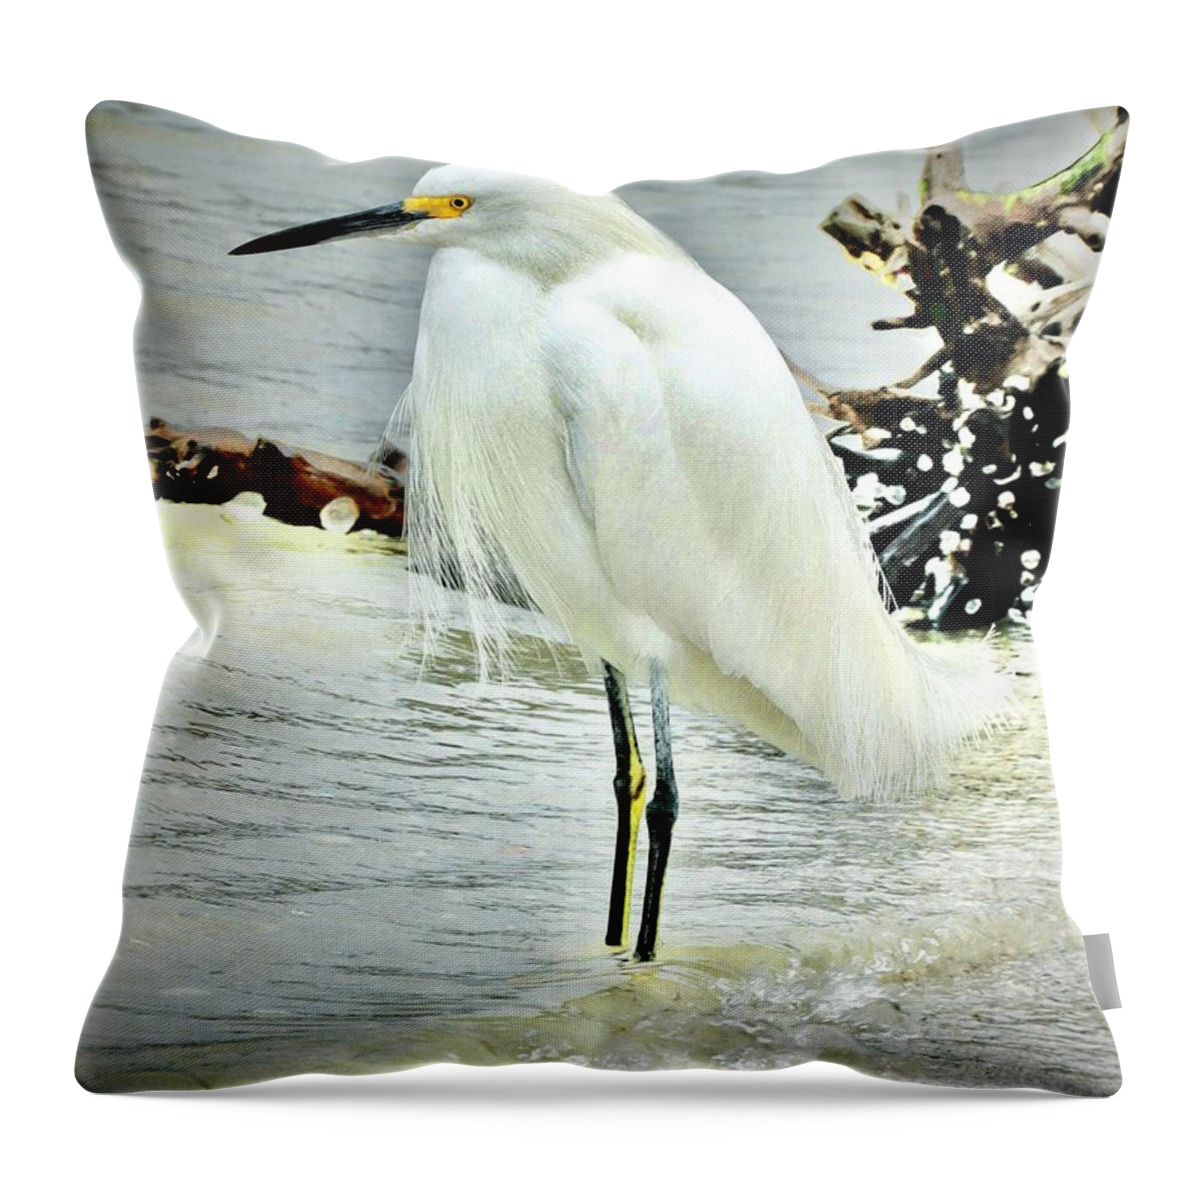 Snowy Throw Pillow featuring the photograph Snowy Egret Fishing by Sarah Lilja